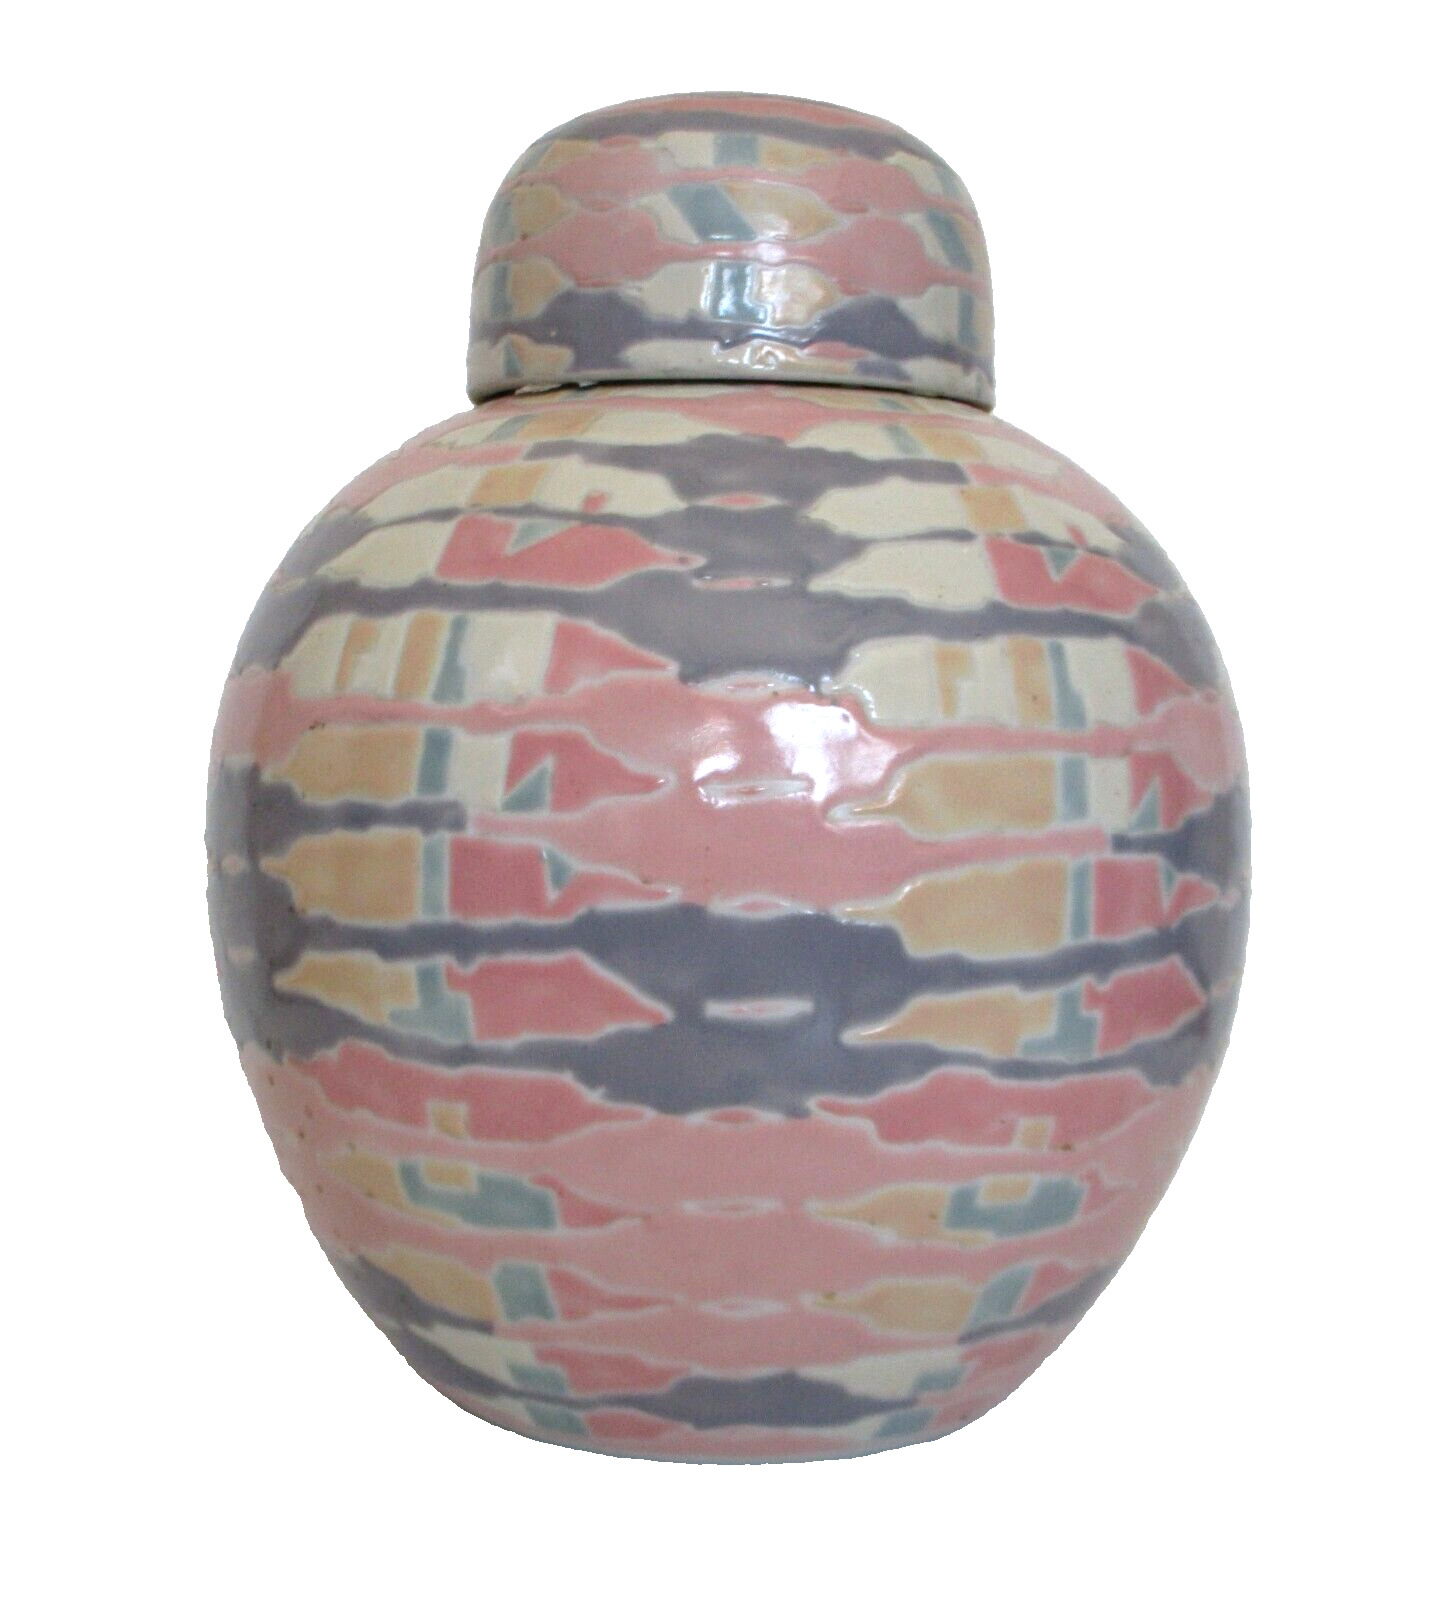 Vintage Textured Abstract Design Chinese Ginger Jar With Lid Macau